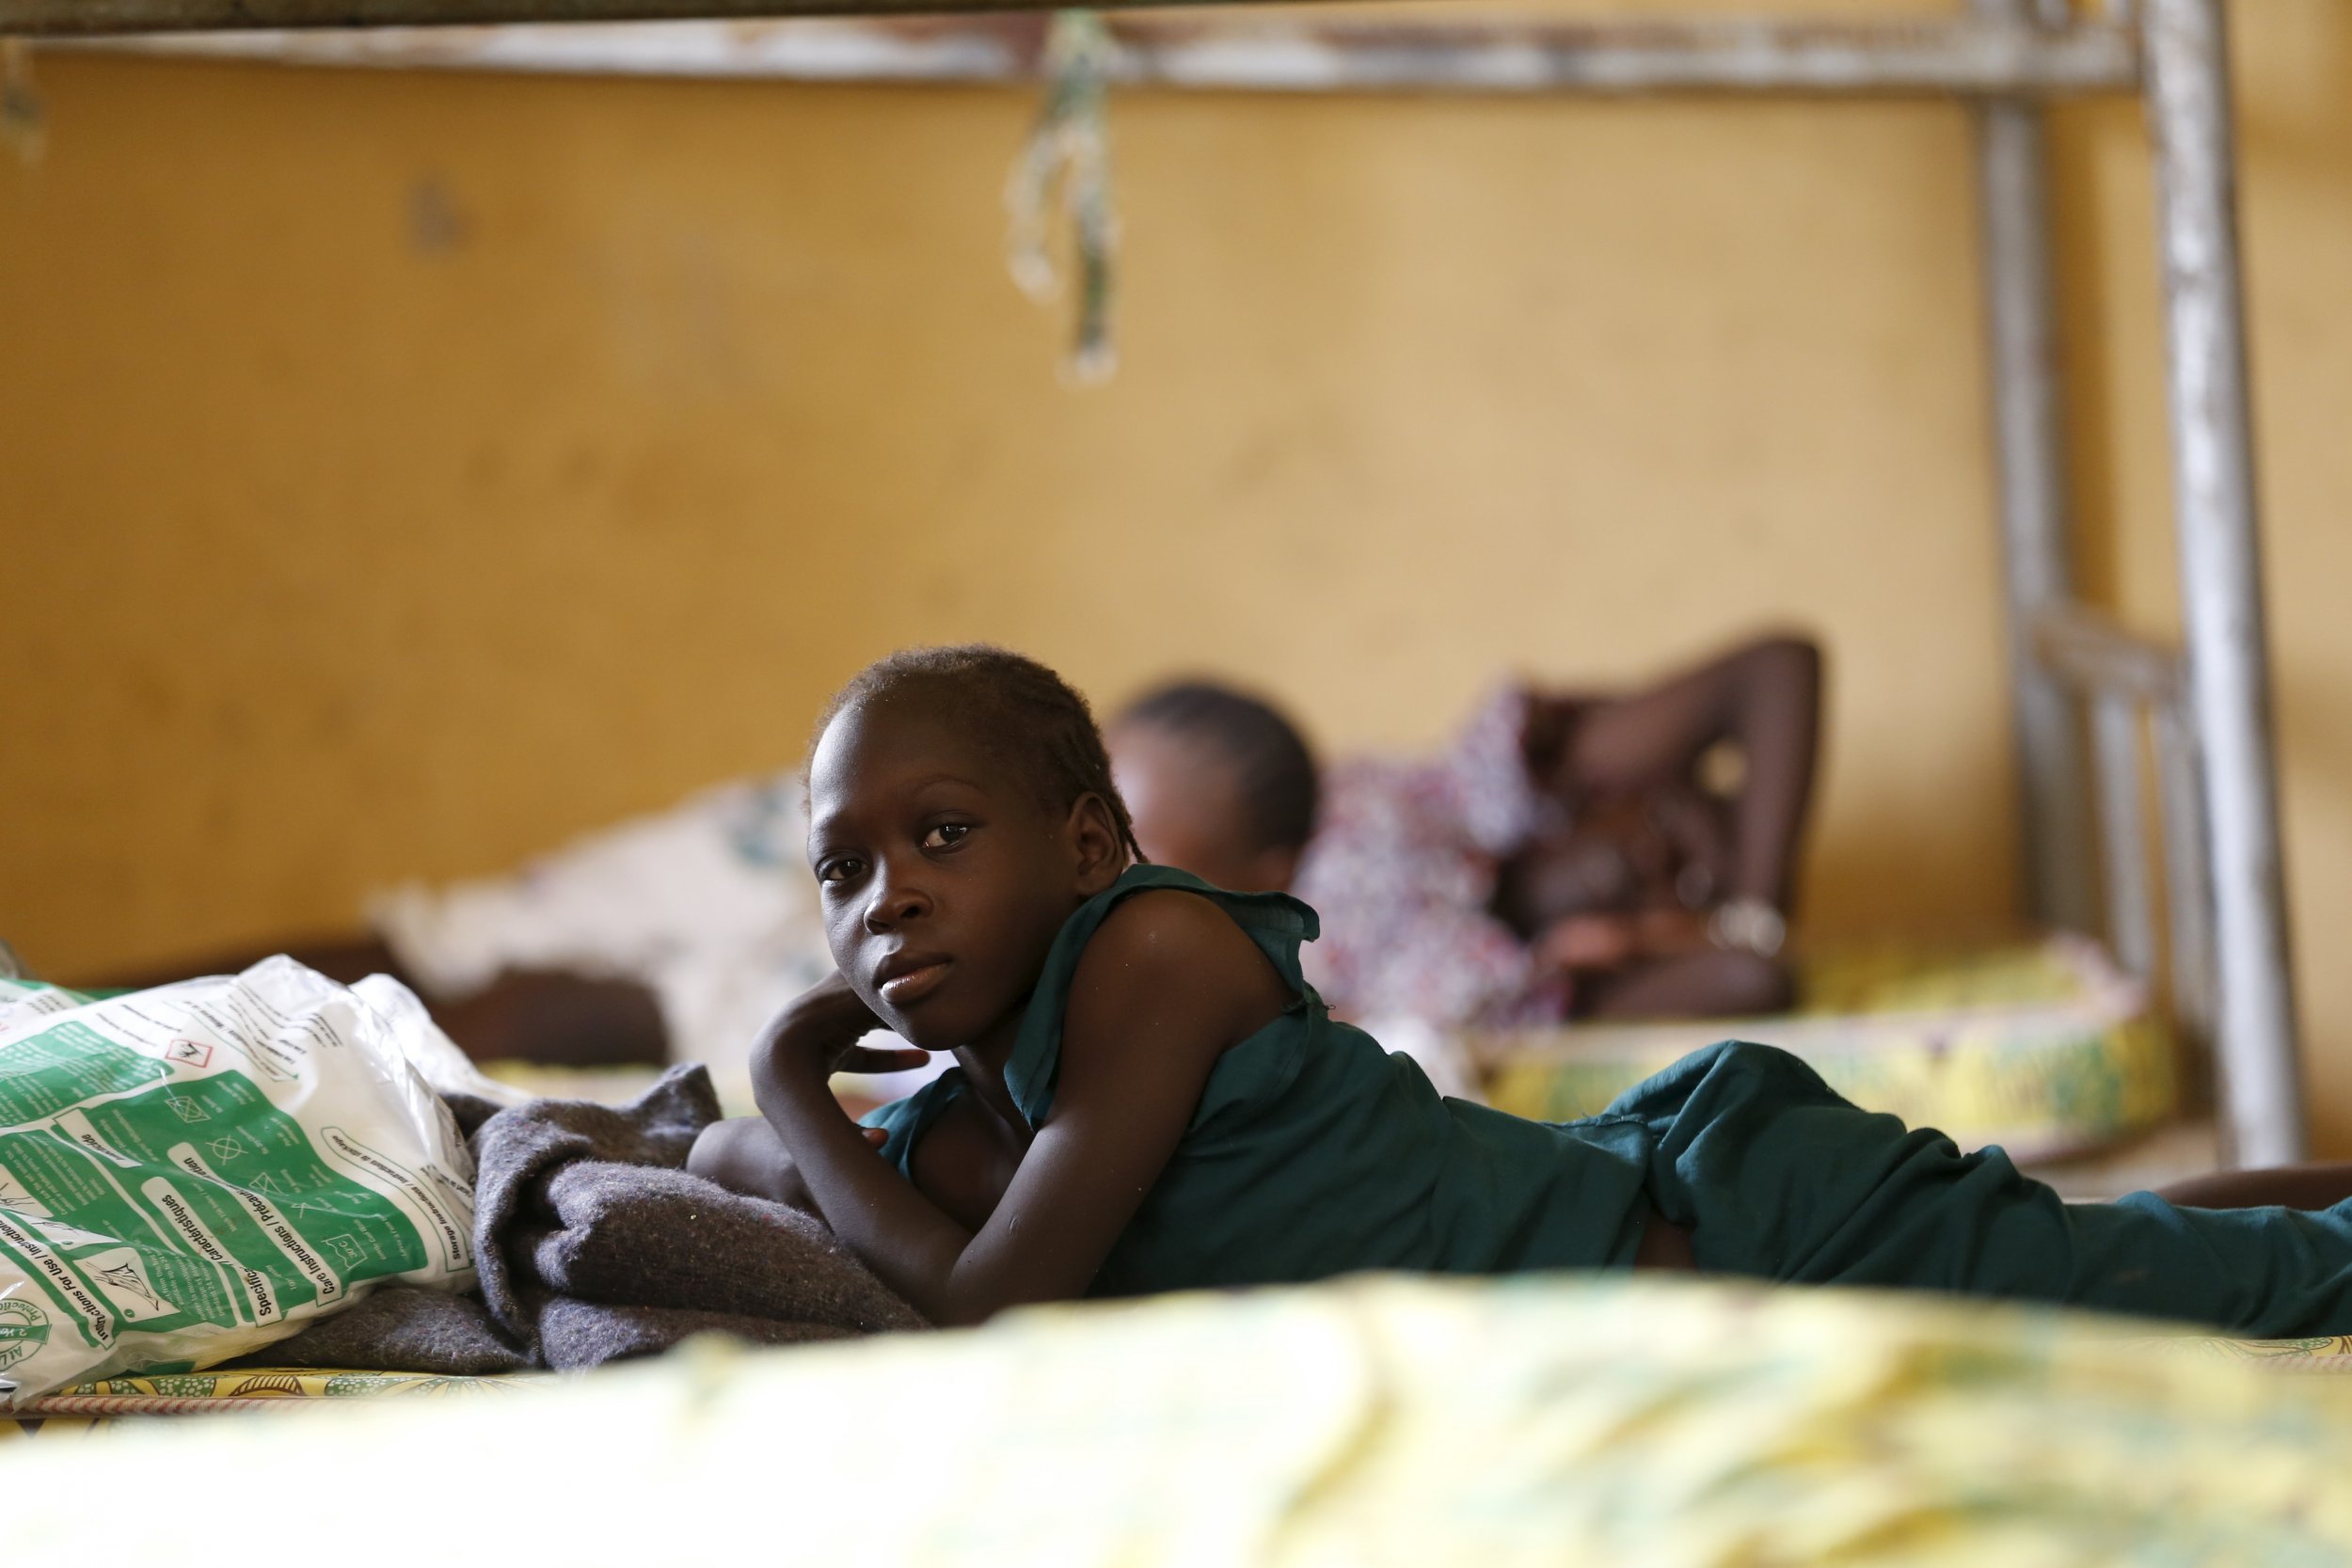 A child rescued from Boko Haram rests in an IDP camp in Yola, Nigeria.